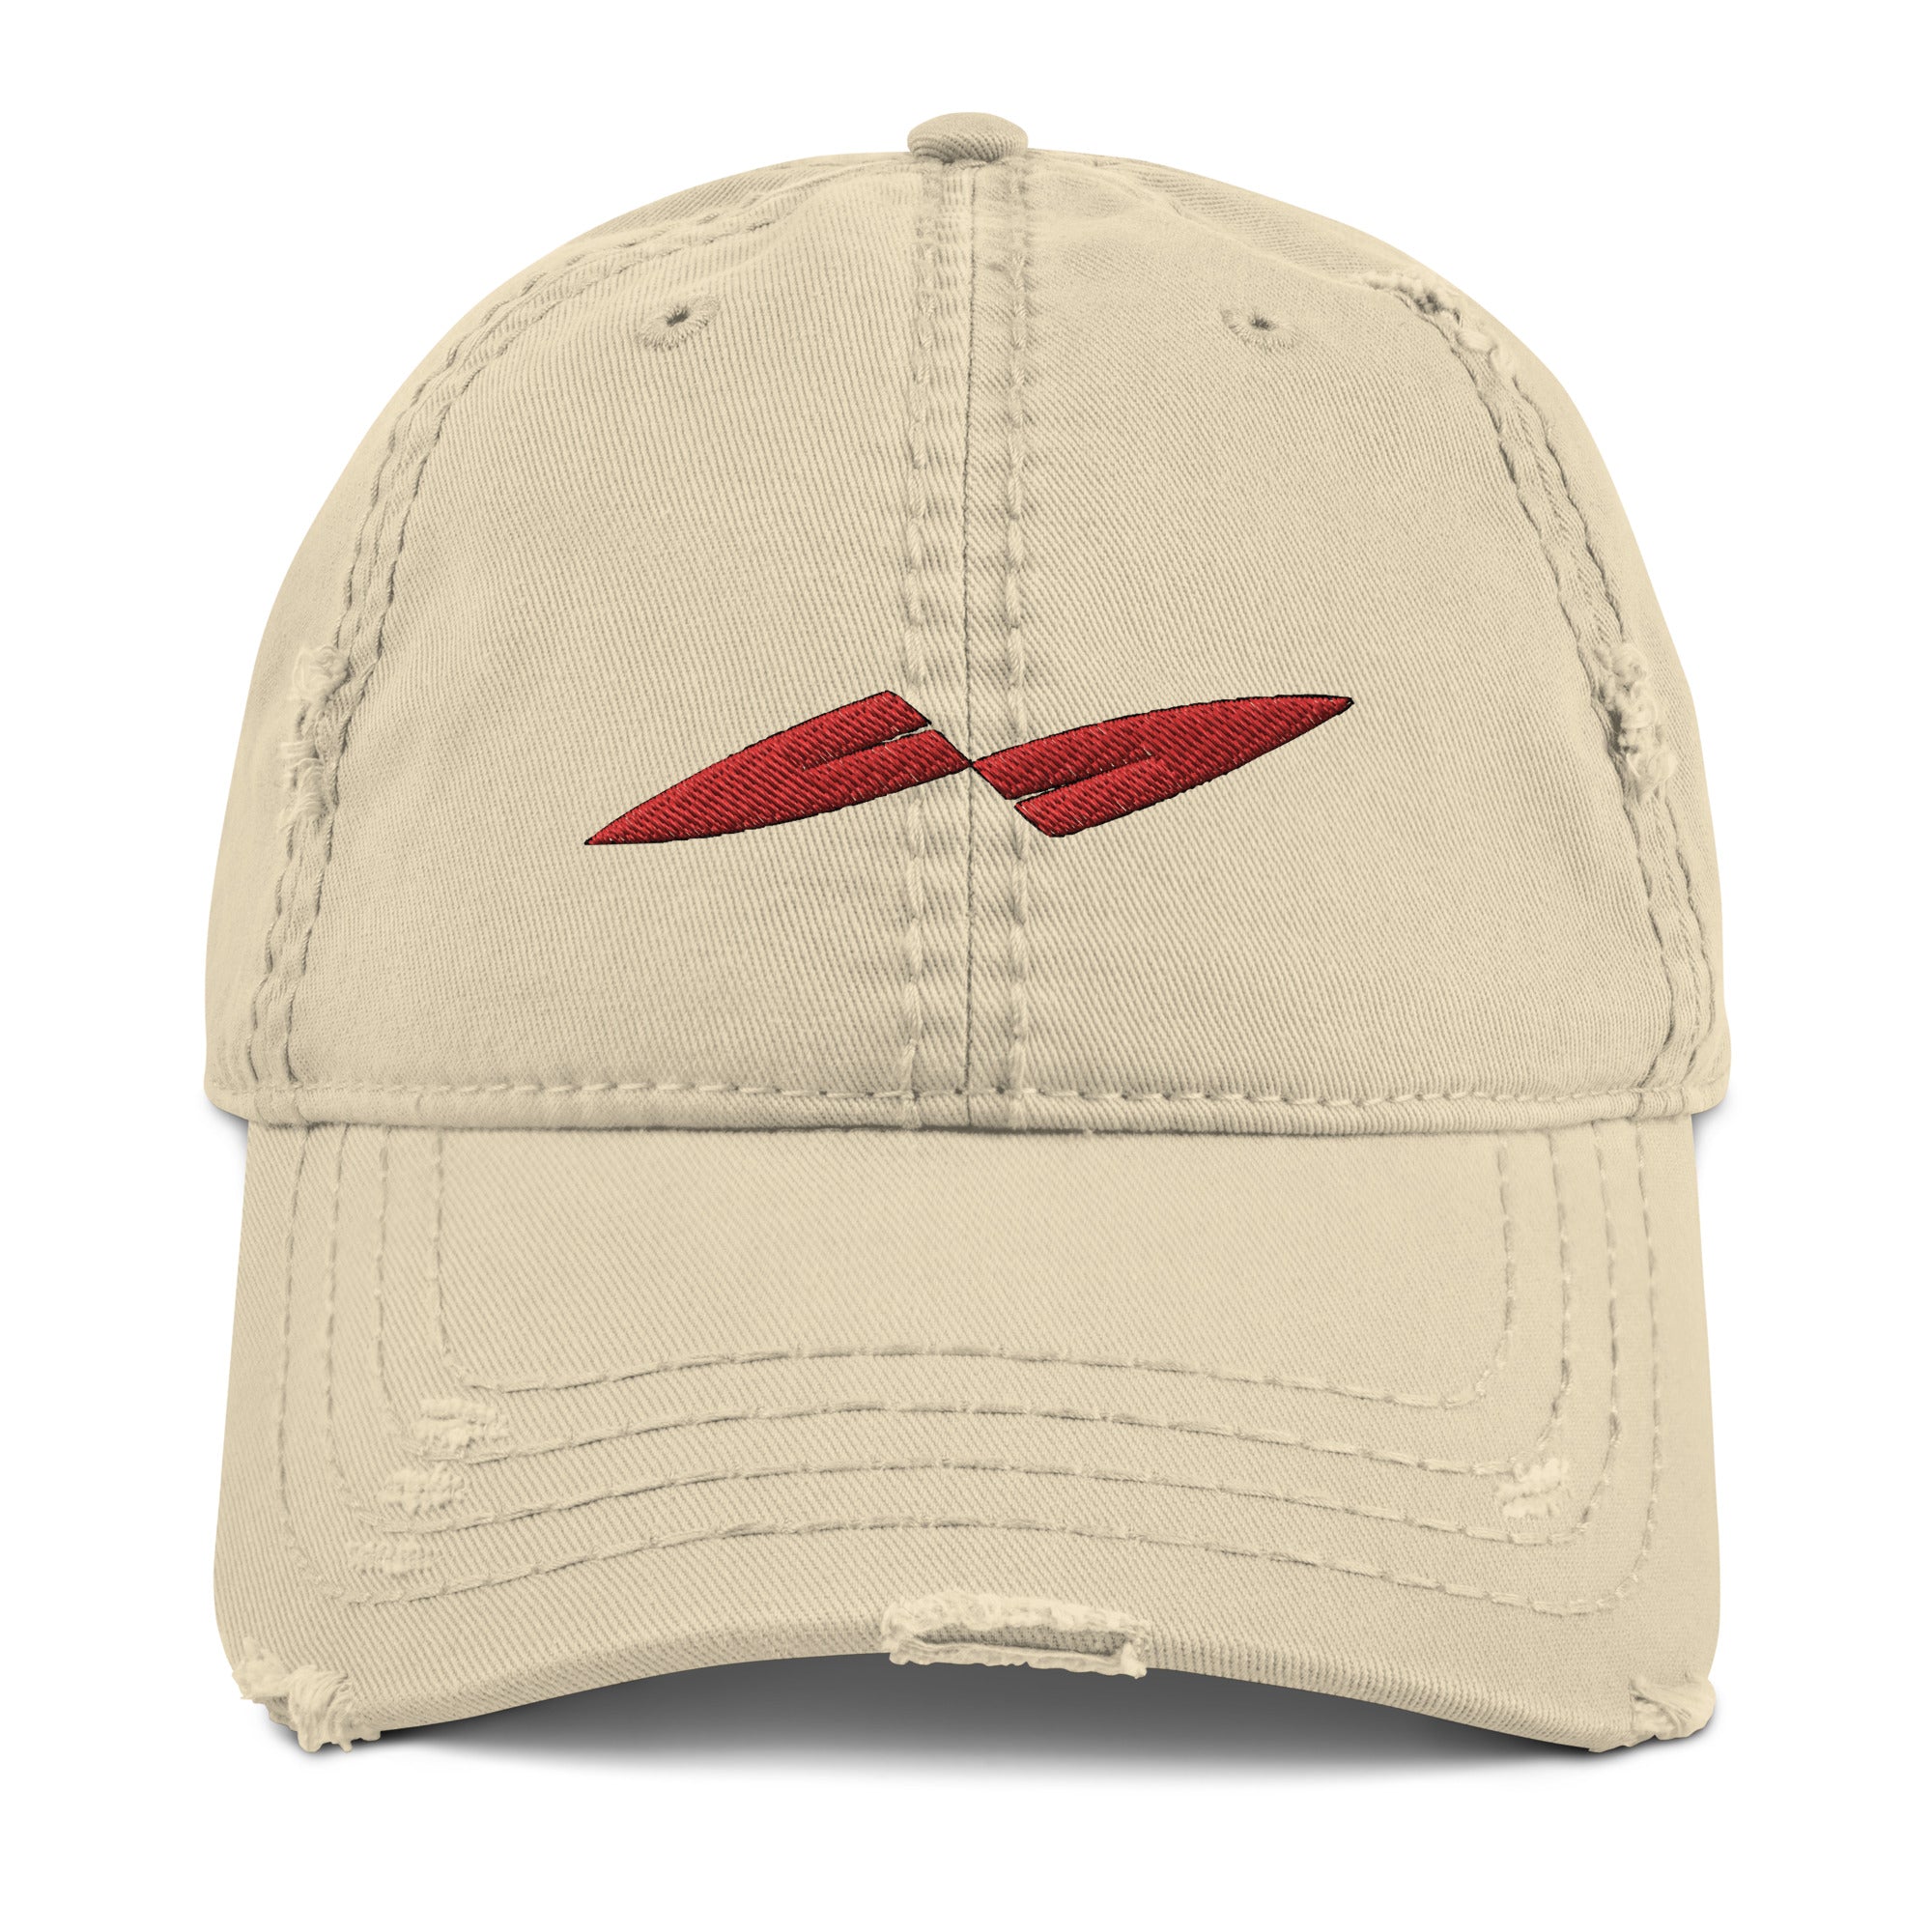 The Musa Blades Distressed Dad Hat